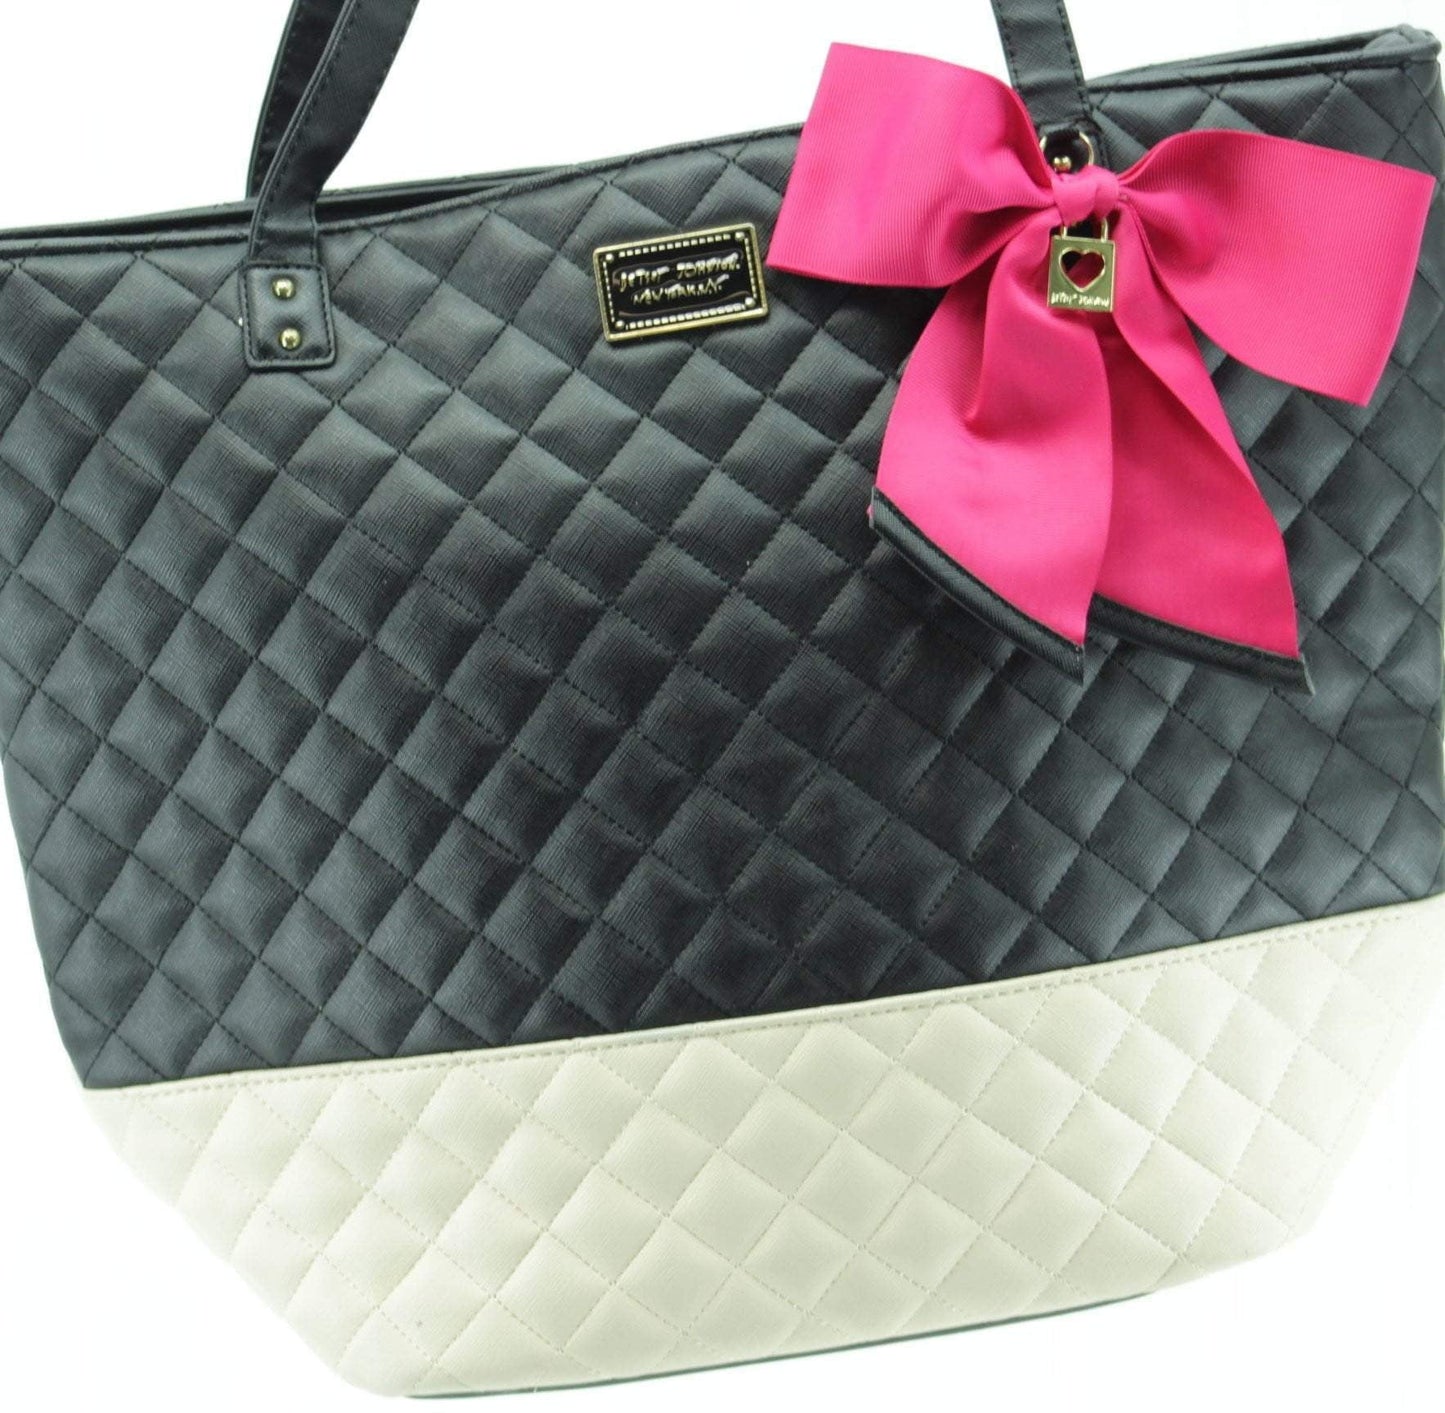 Betsey Johnson Quilted Satchel Bag - Black White Bow Heart cool lining